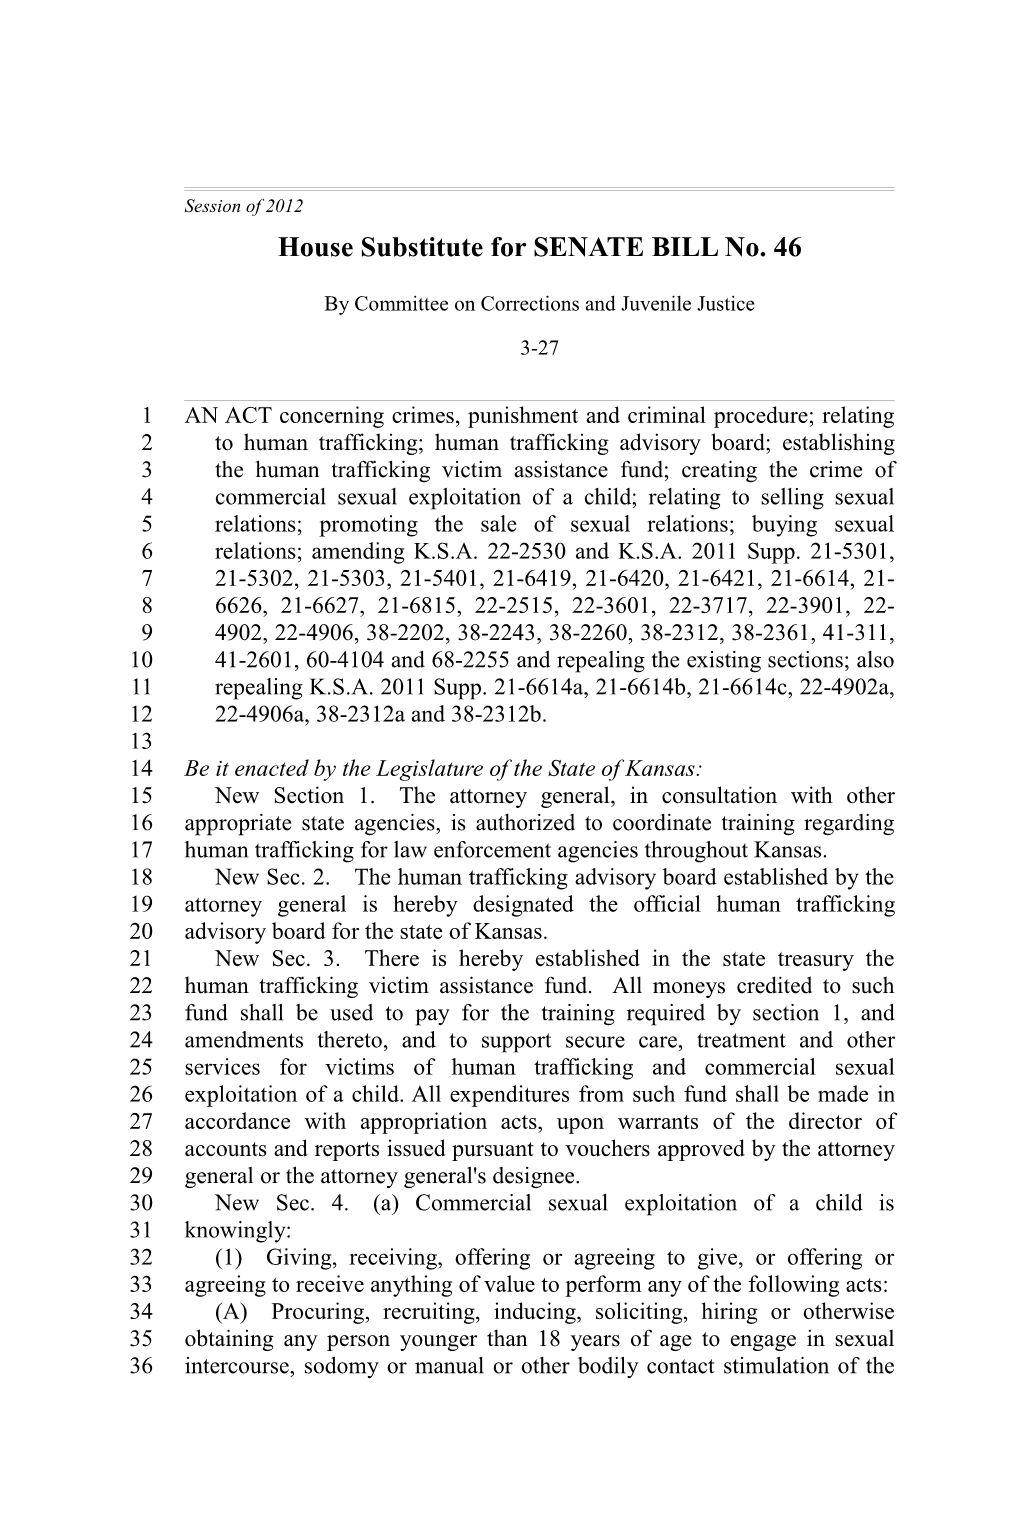 House Substitute for SENATE BILL No. 46